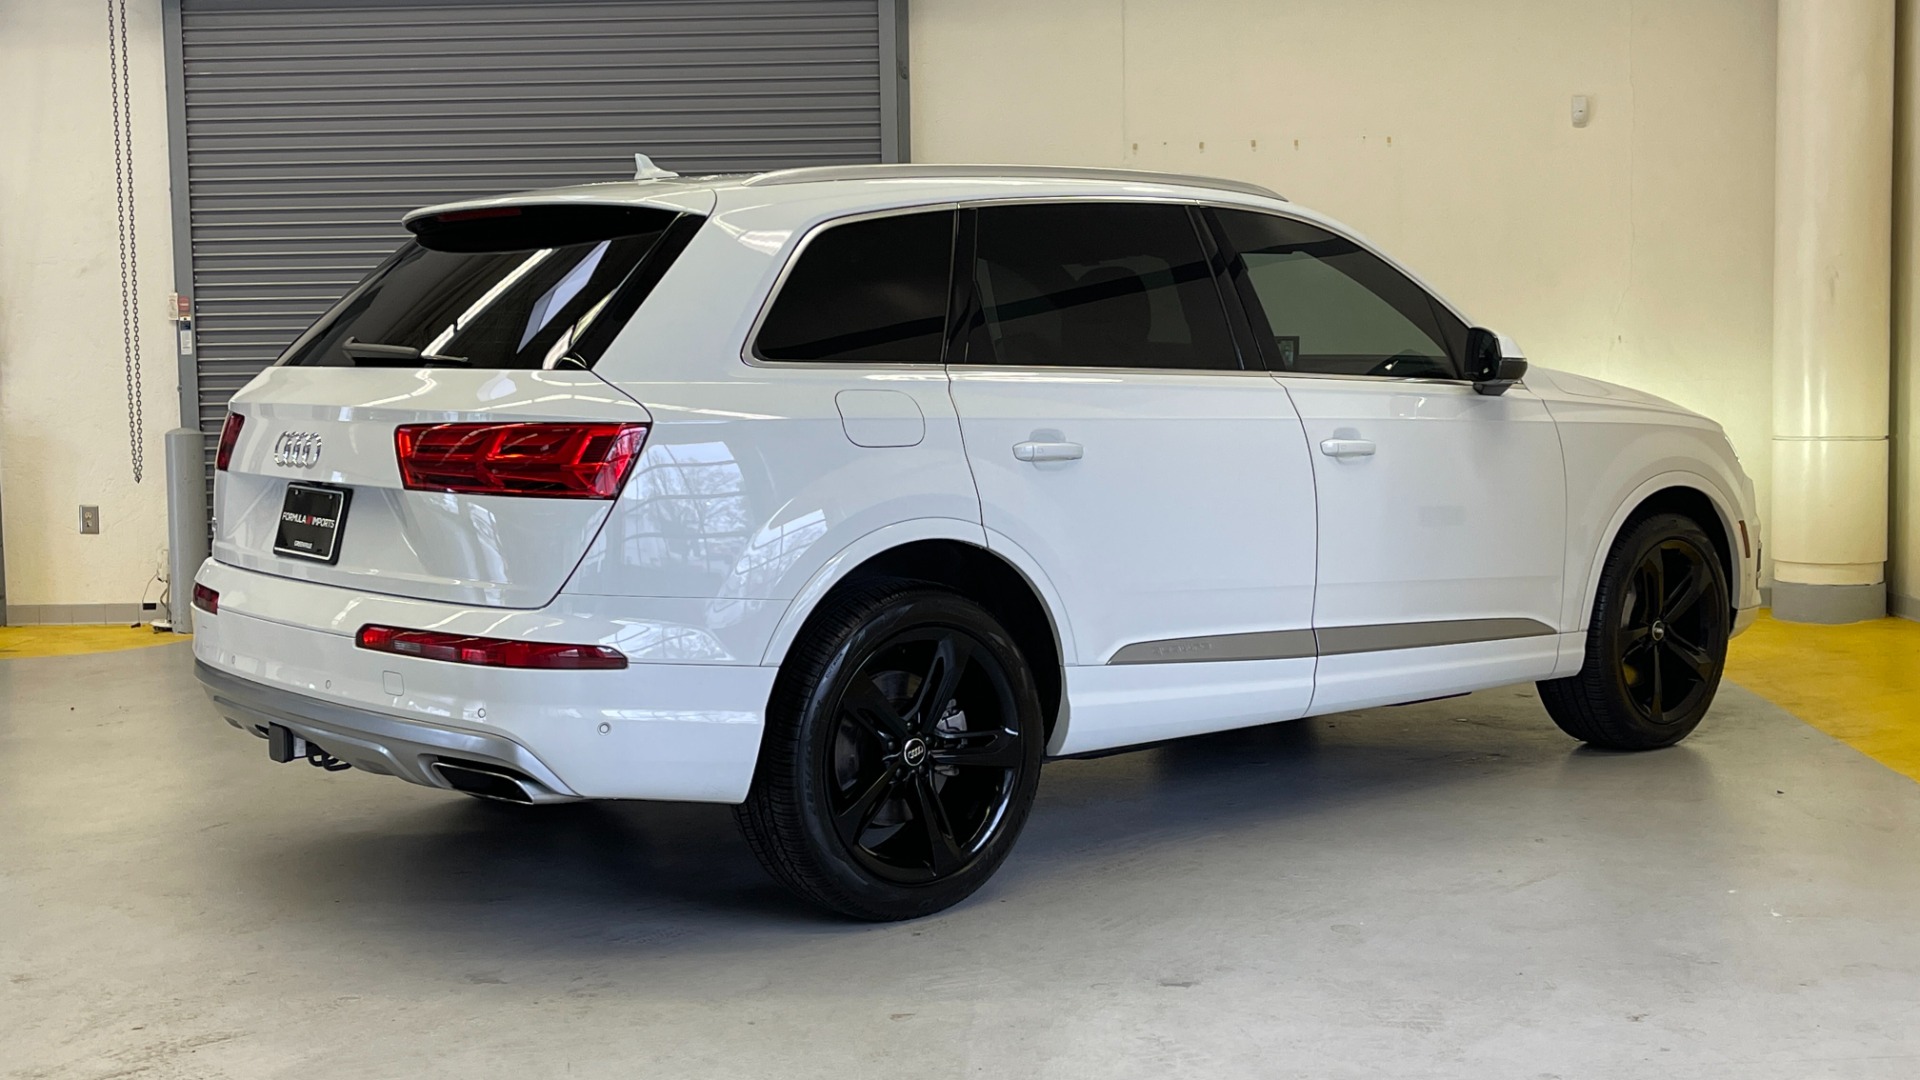 Used 2019 Audi Q7 PRESTIGE / NAV / SUNROOF / LANE ASST / TOWING / 21-IN WHLS / REA for sale $60,995 at Formula Imports in Charlotte NC 28227 6